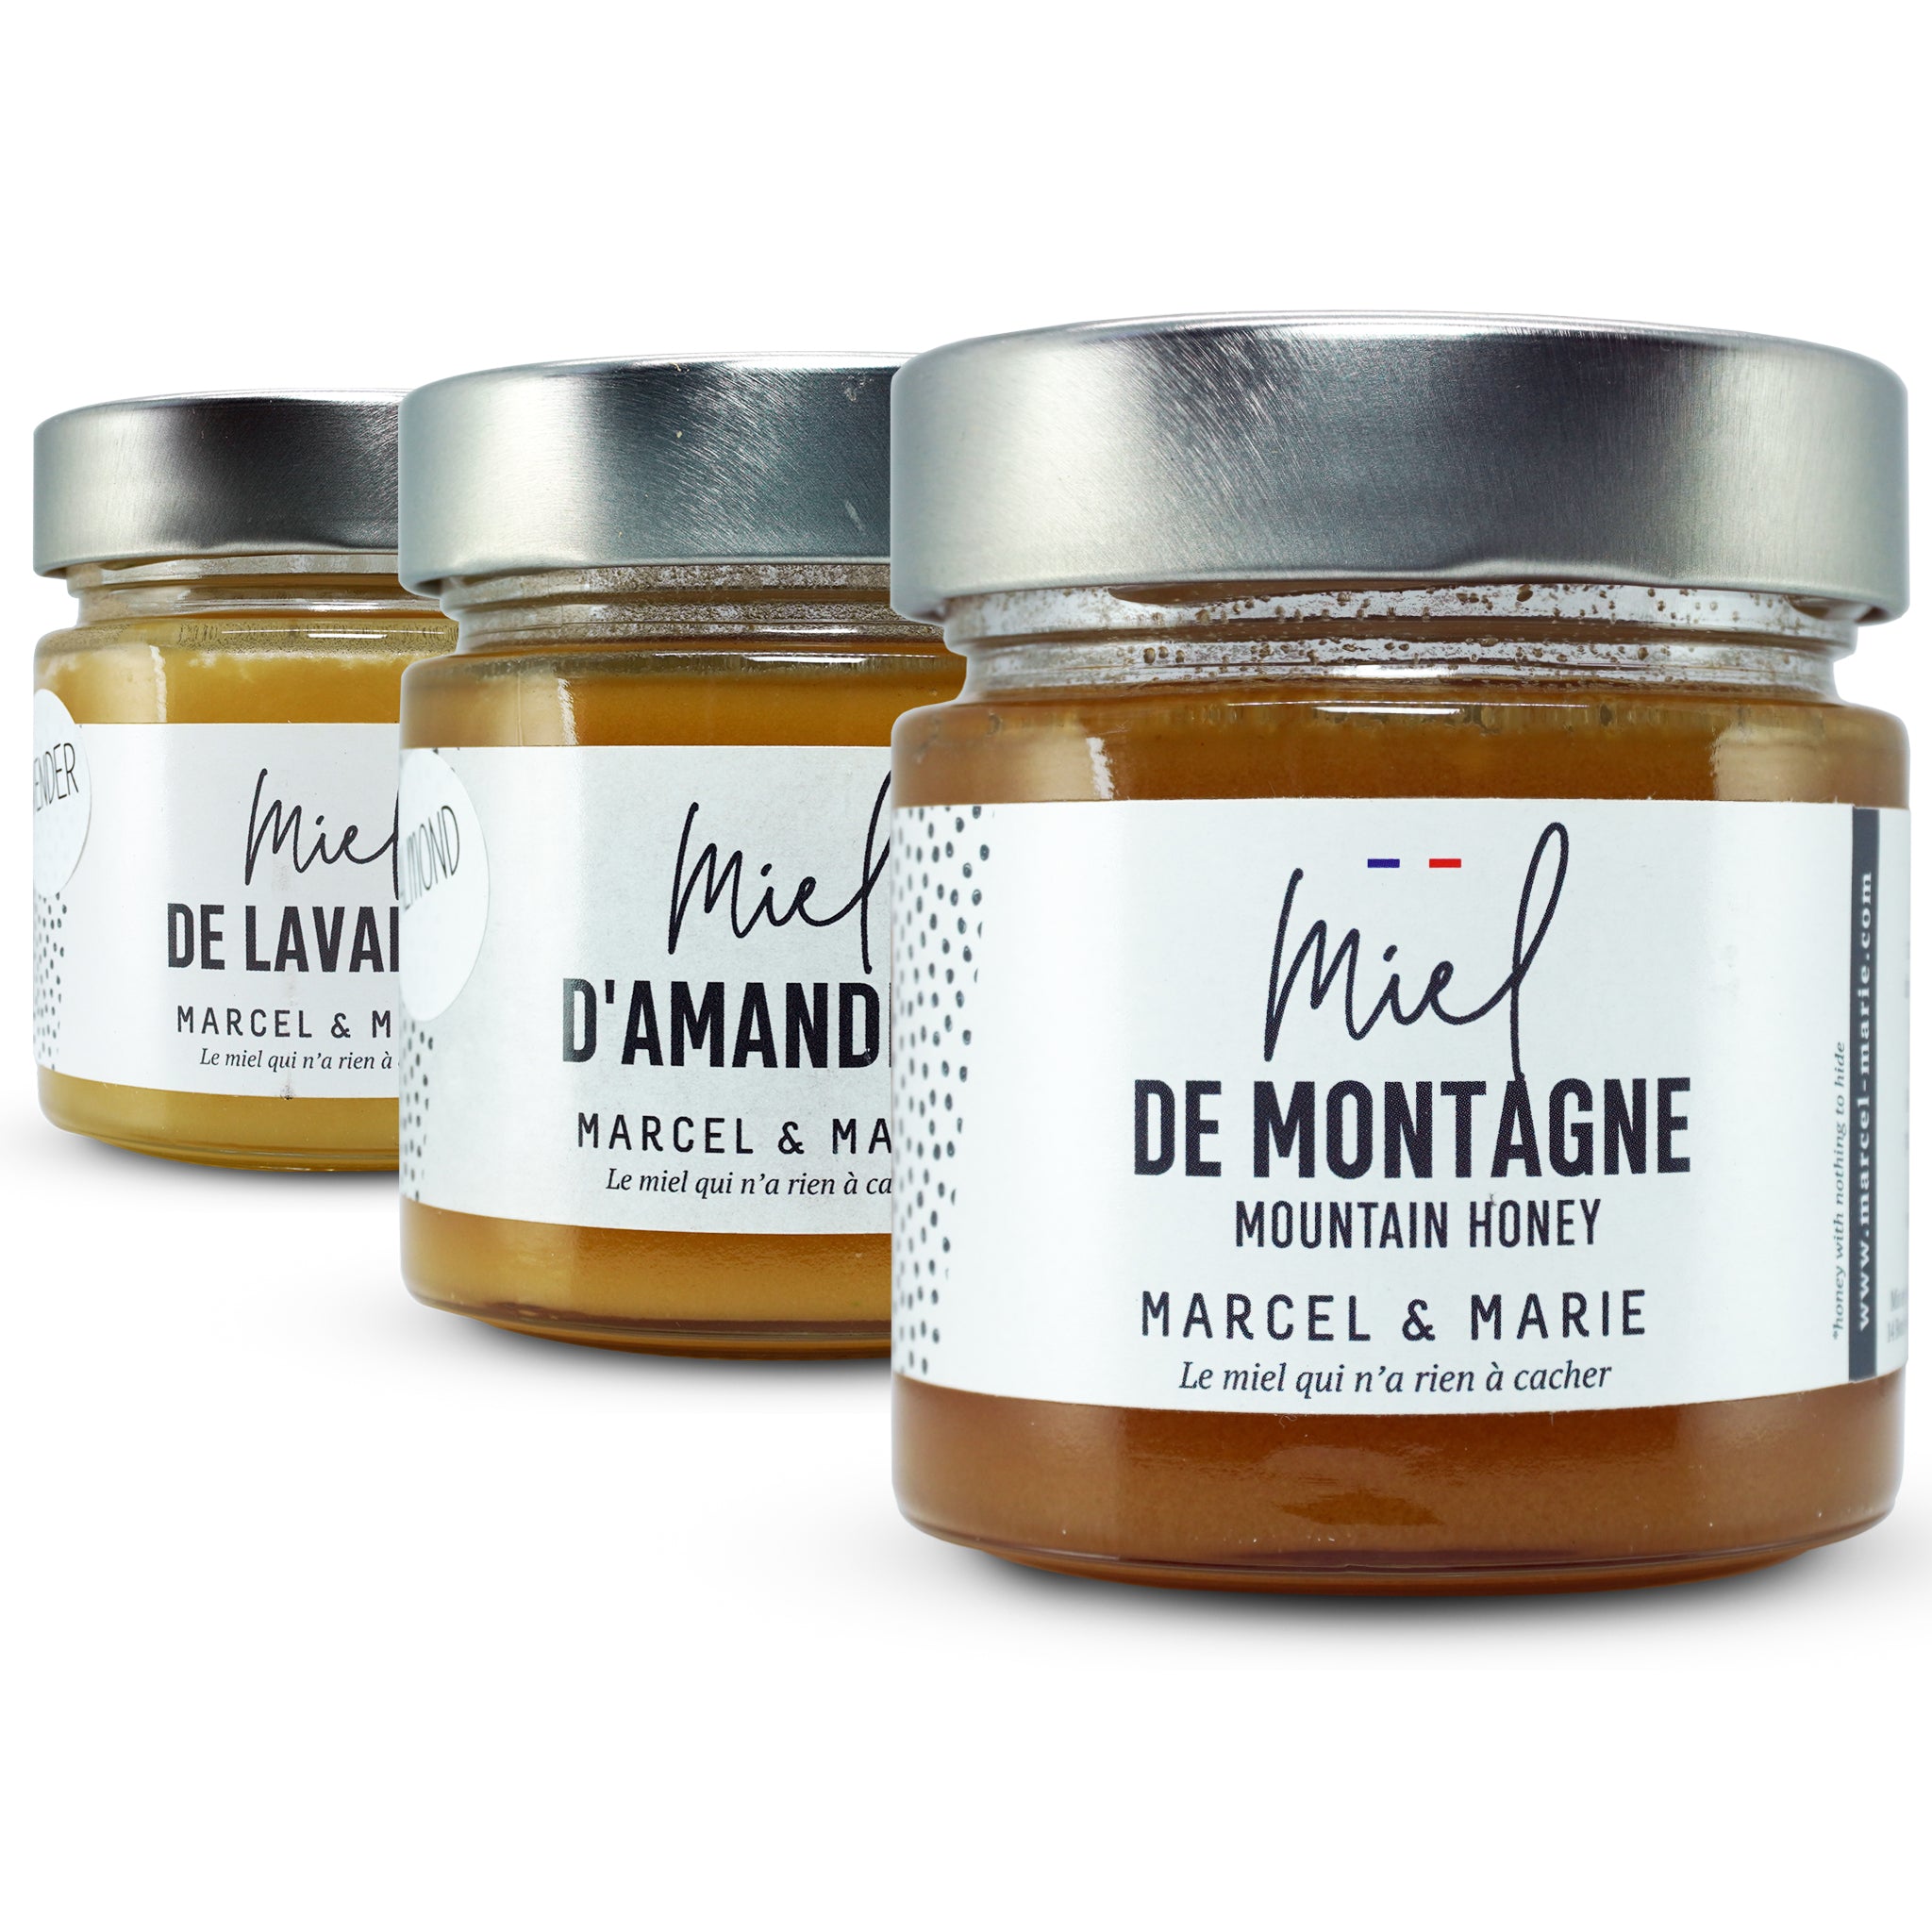 French Raw Honey - Marcel & Marie Georgetown Olive Oil Co.